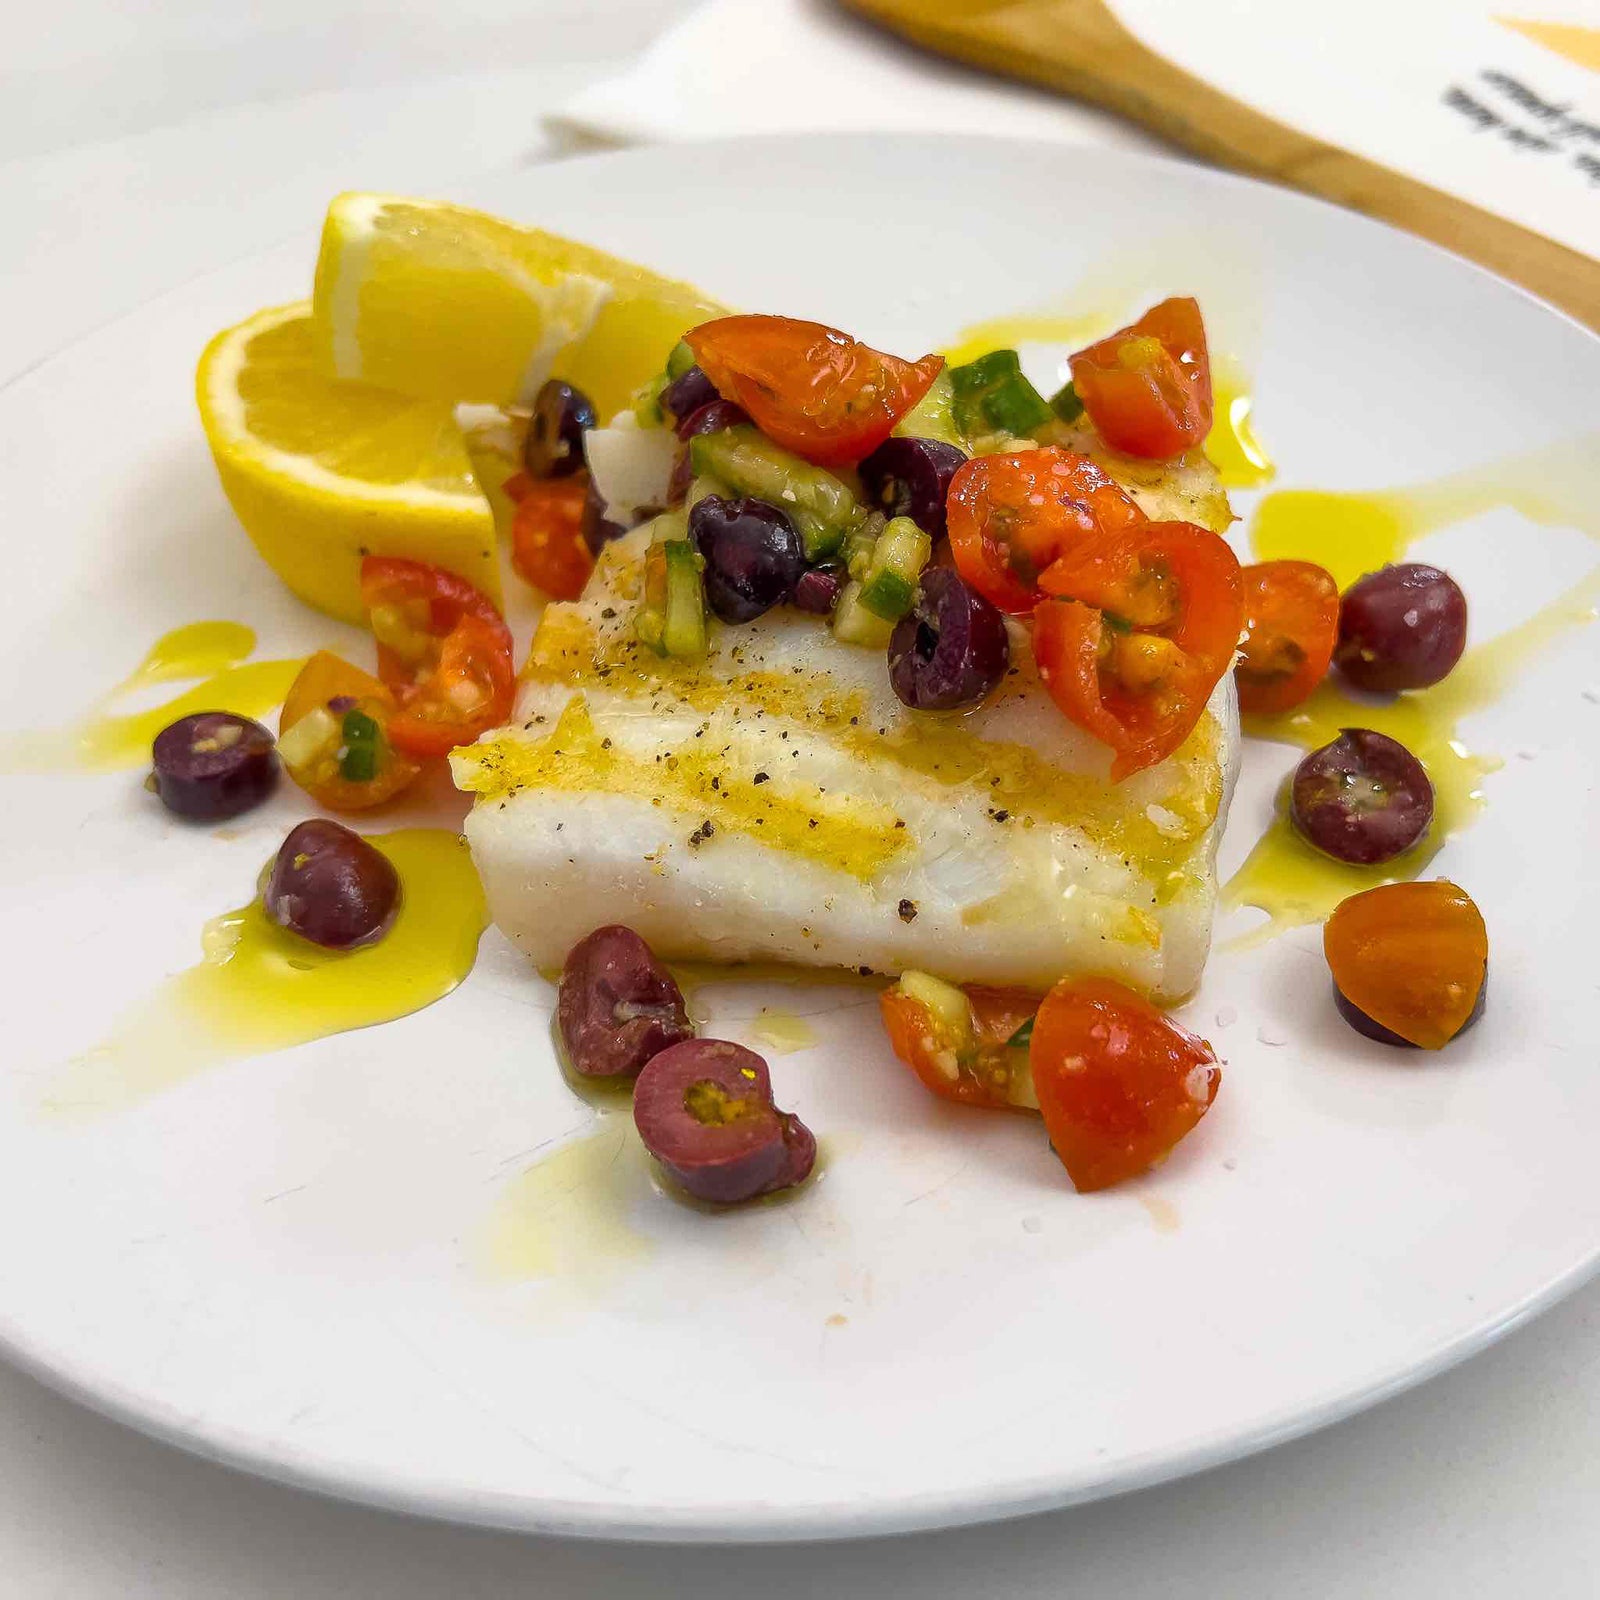 Seared Halibut with Citrus Tuscan Relish